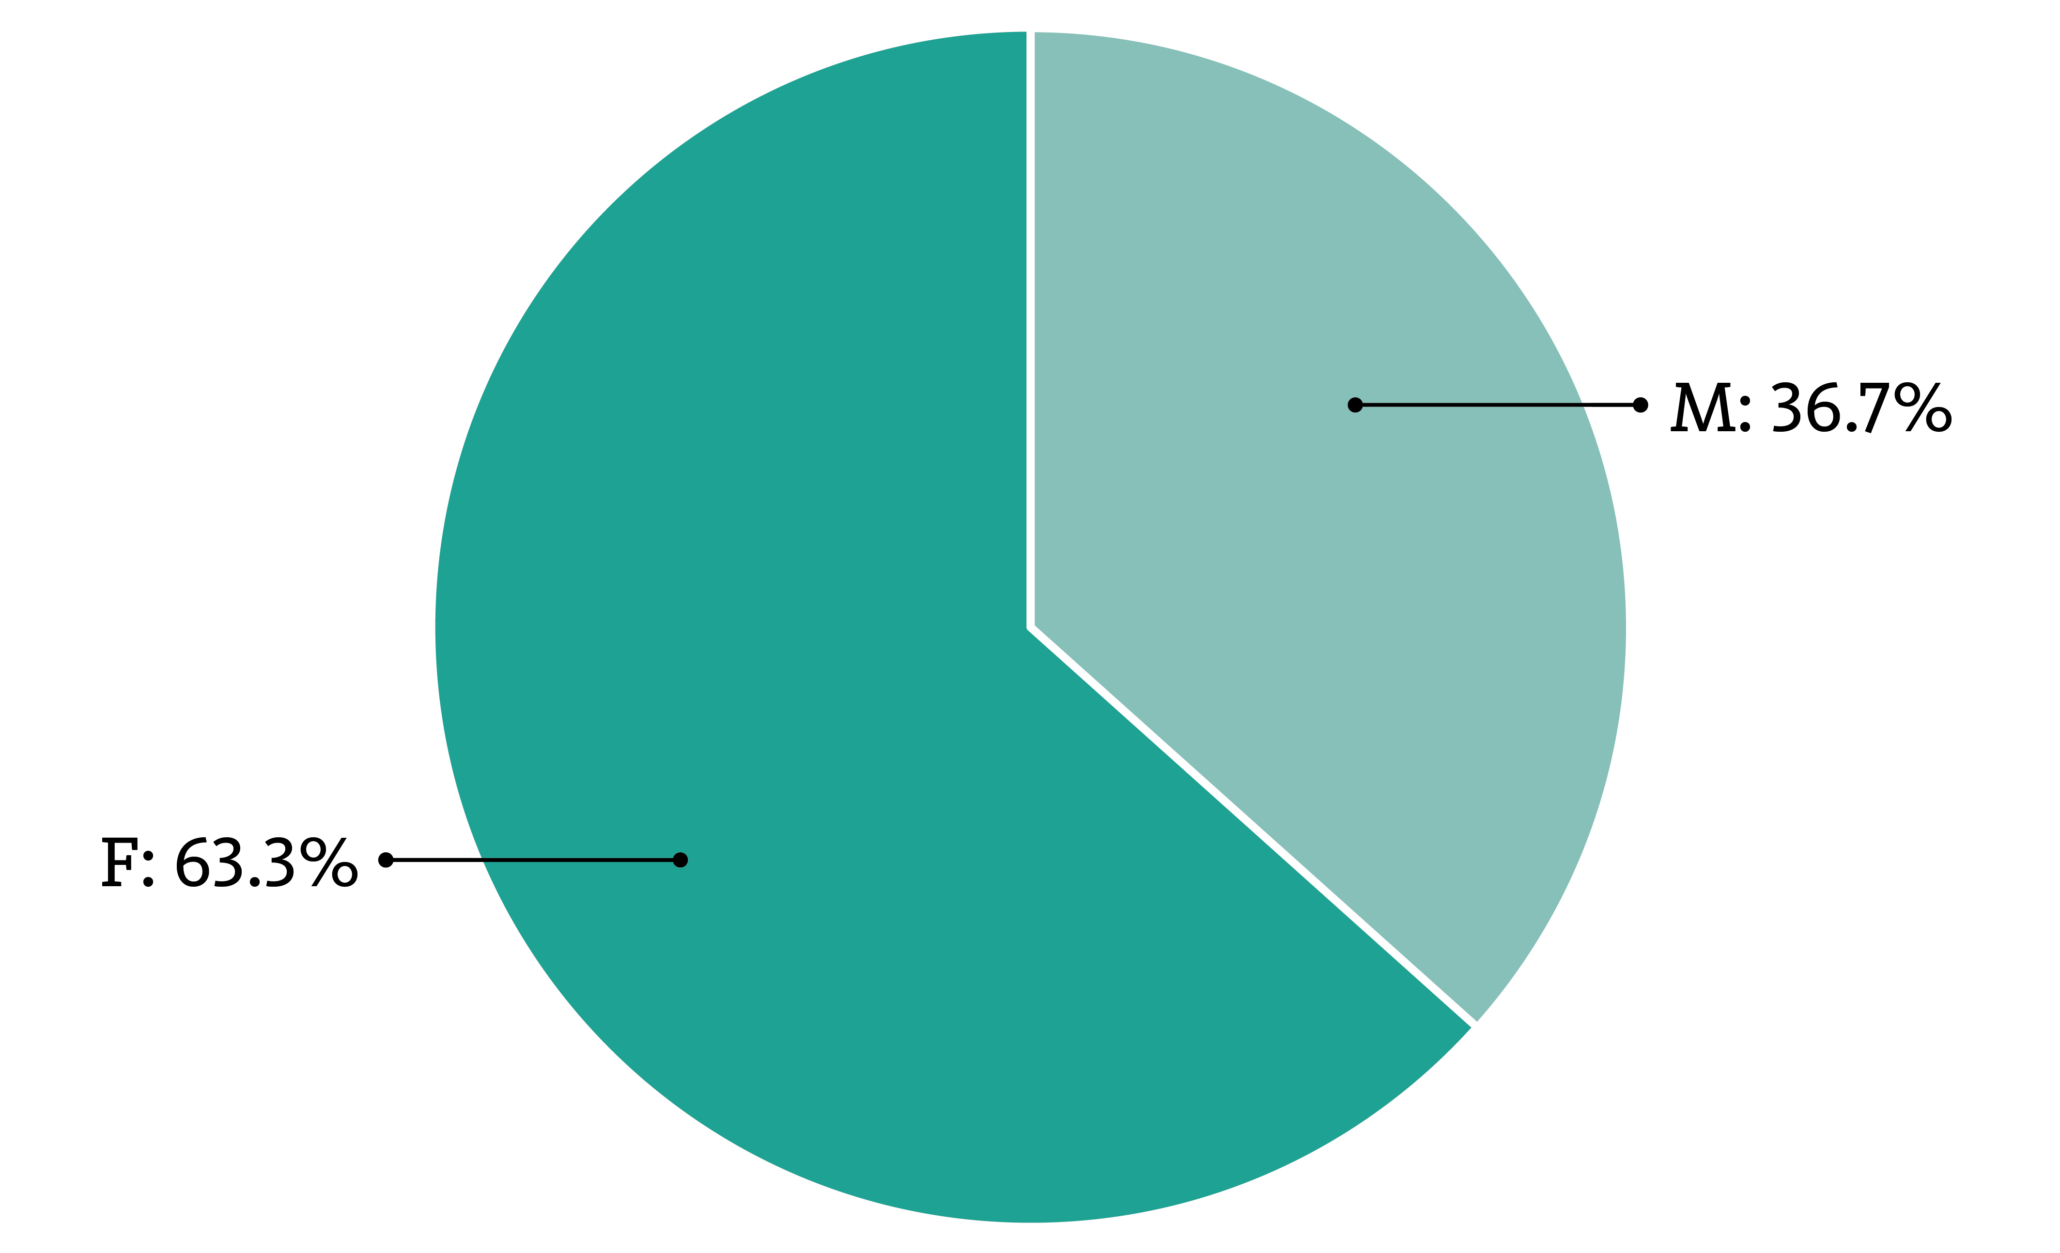 Infographic, pie chart depicting Think Company gender breakdown